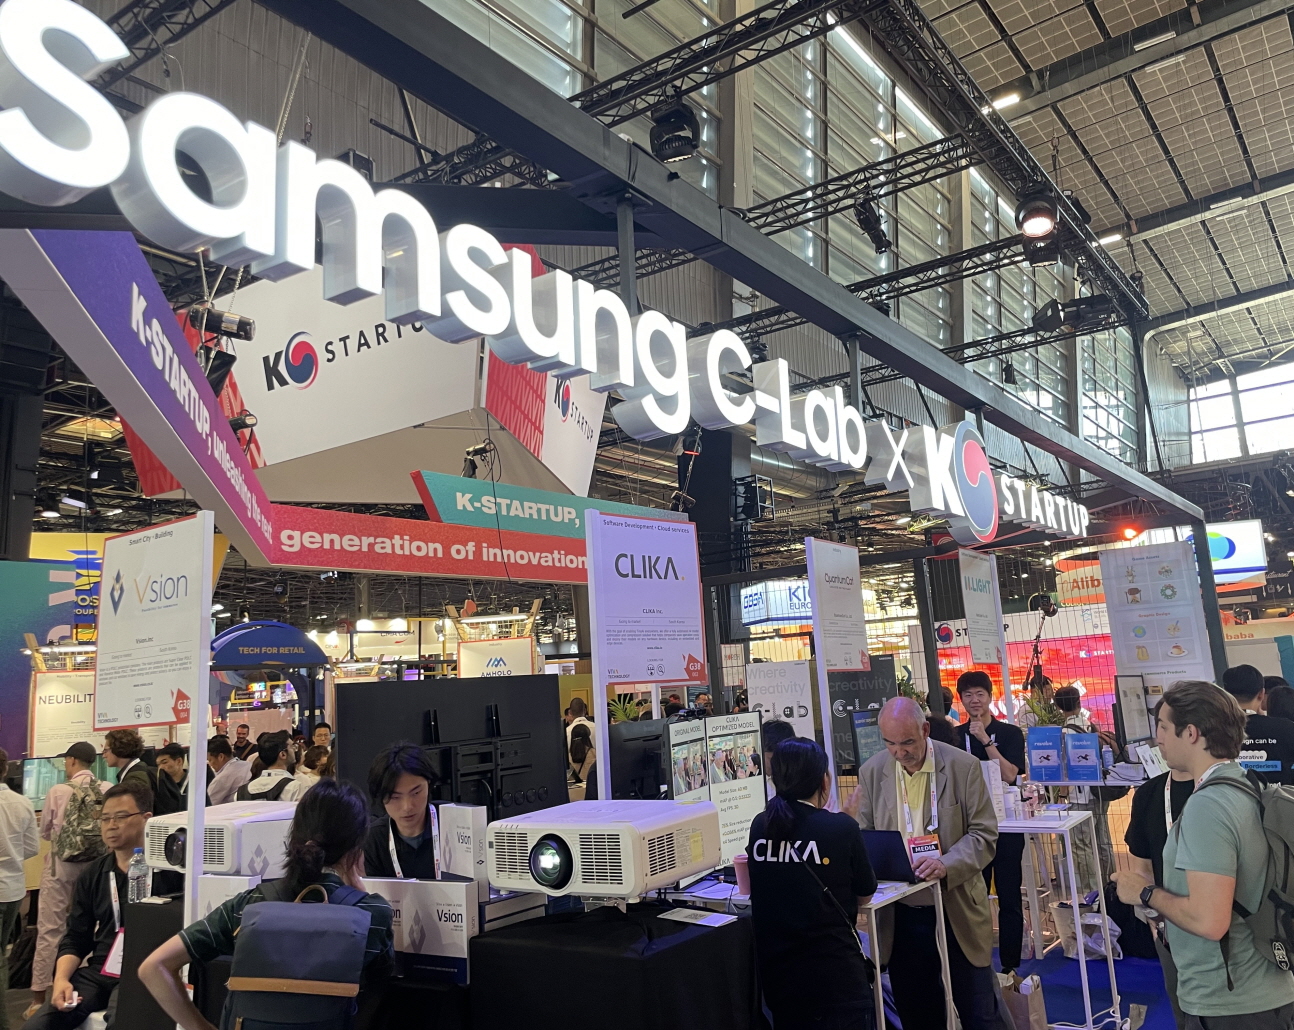 Samsung Electronics' Brand Value Makes Double-Digit Increase